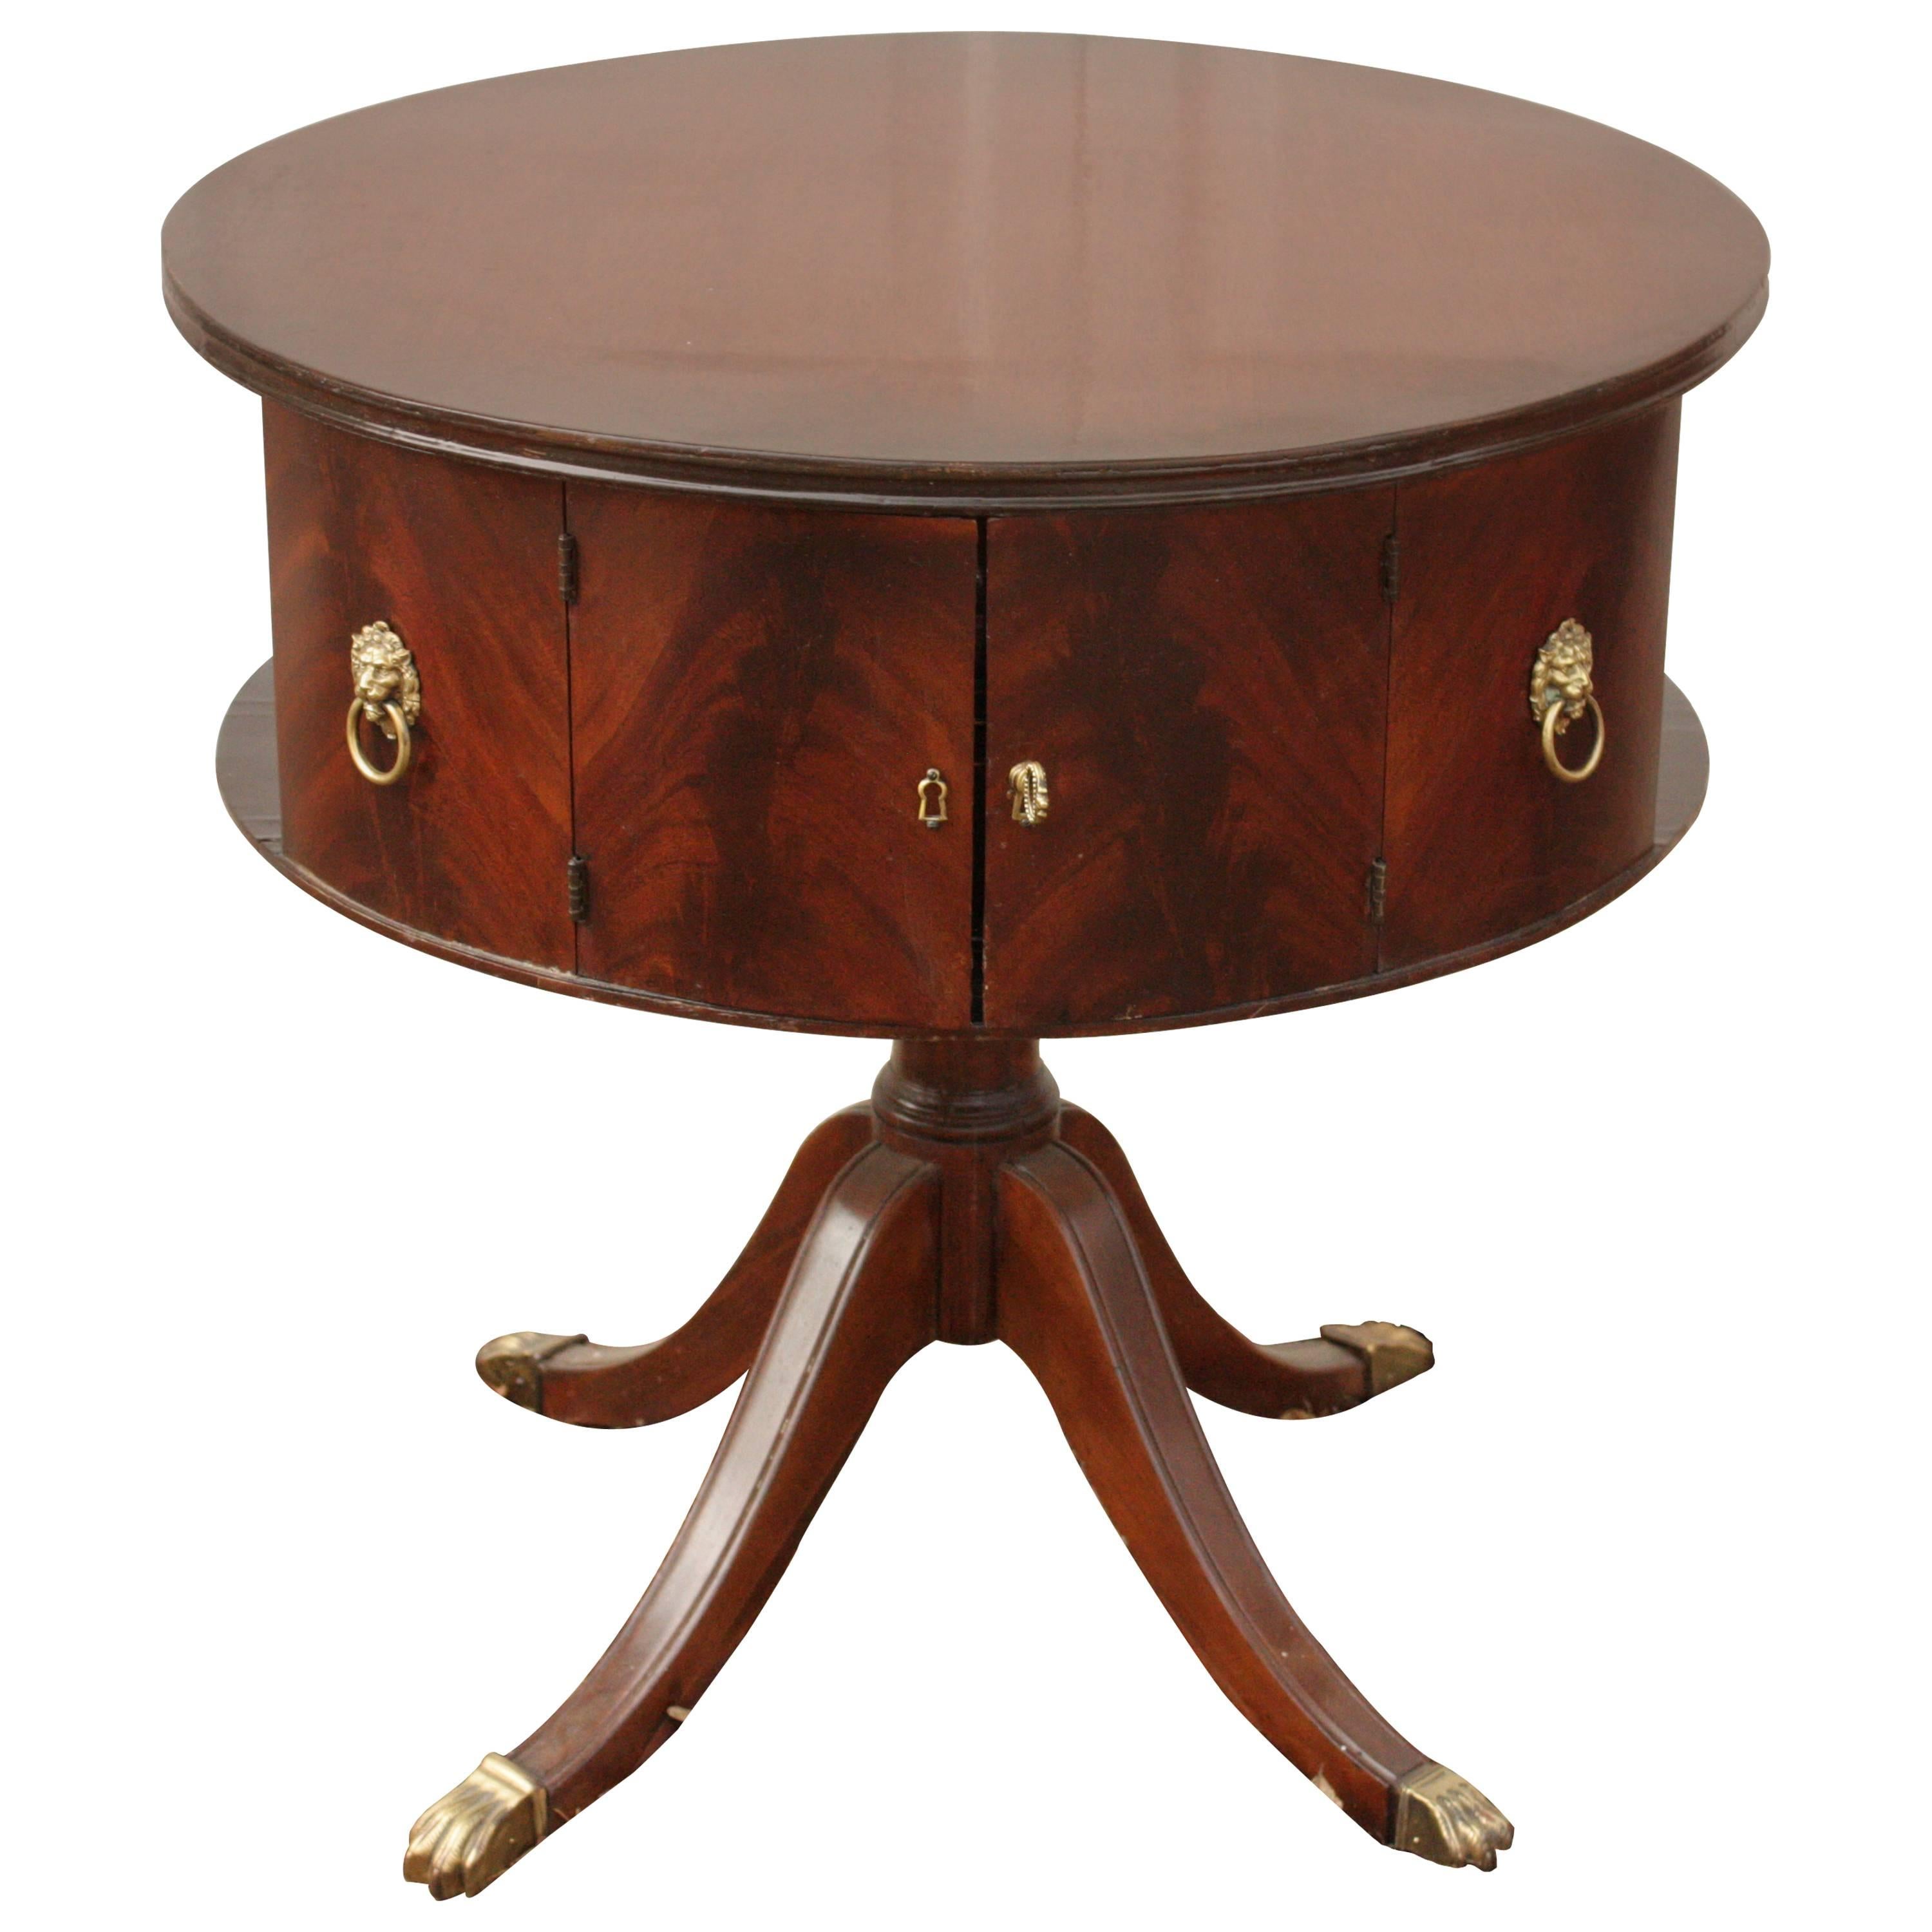 1930s English Round Mahogany Pedestal Table with Brass Lion Pulls and Feet For Sale